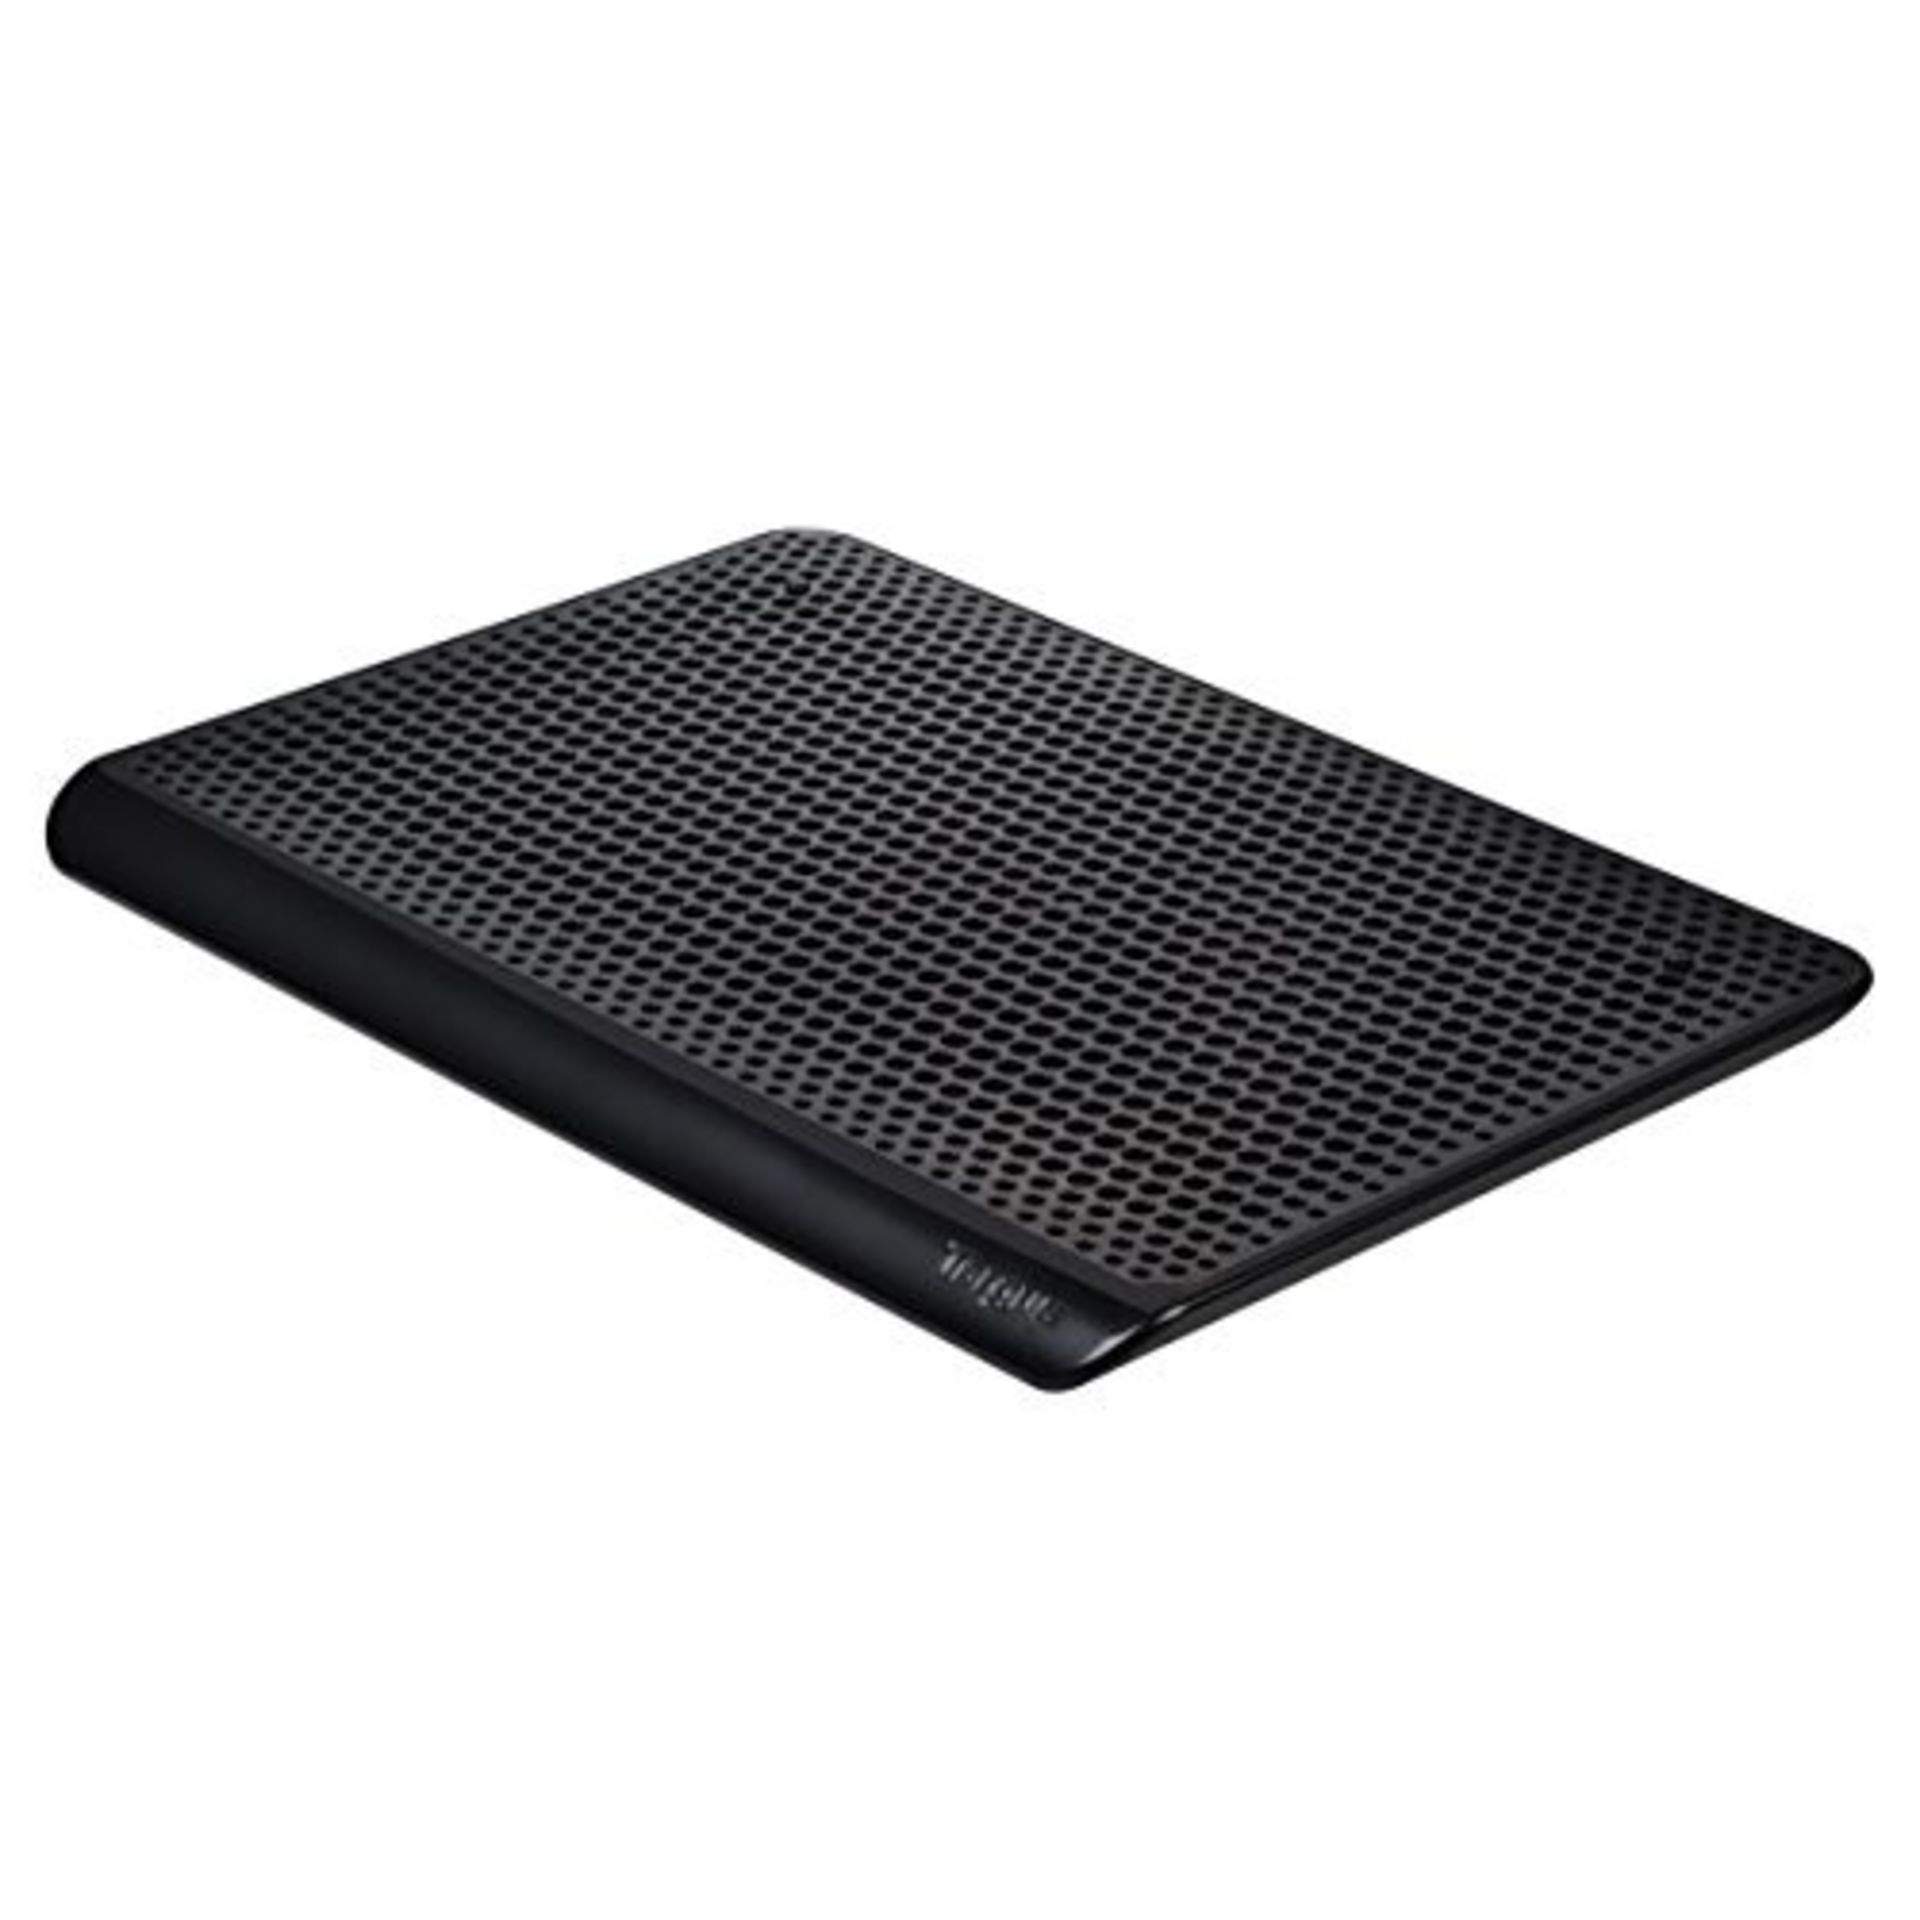 Targus Chill Mat Ultraslim Quiet and Portable Cooling Pad for Laptop, Black (AWE69EU)